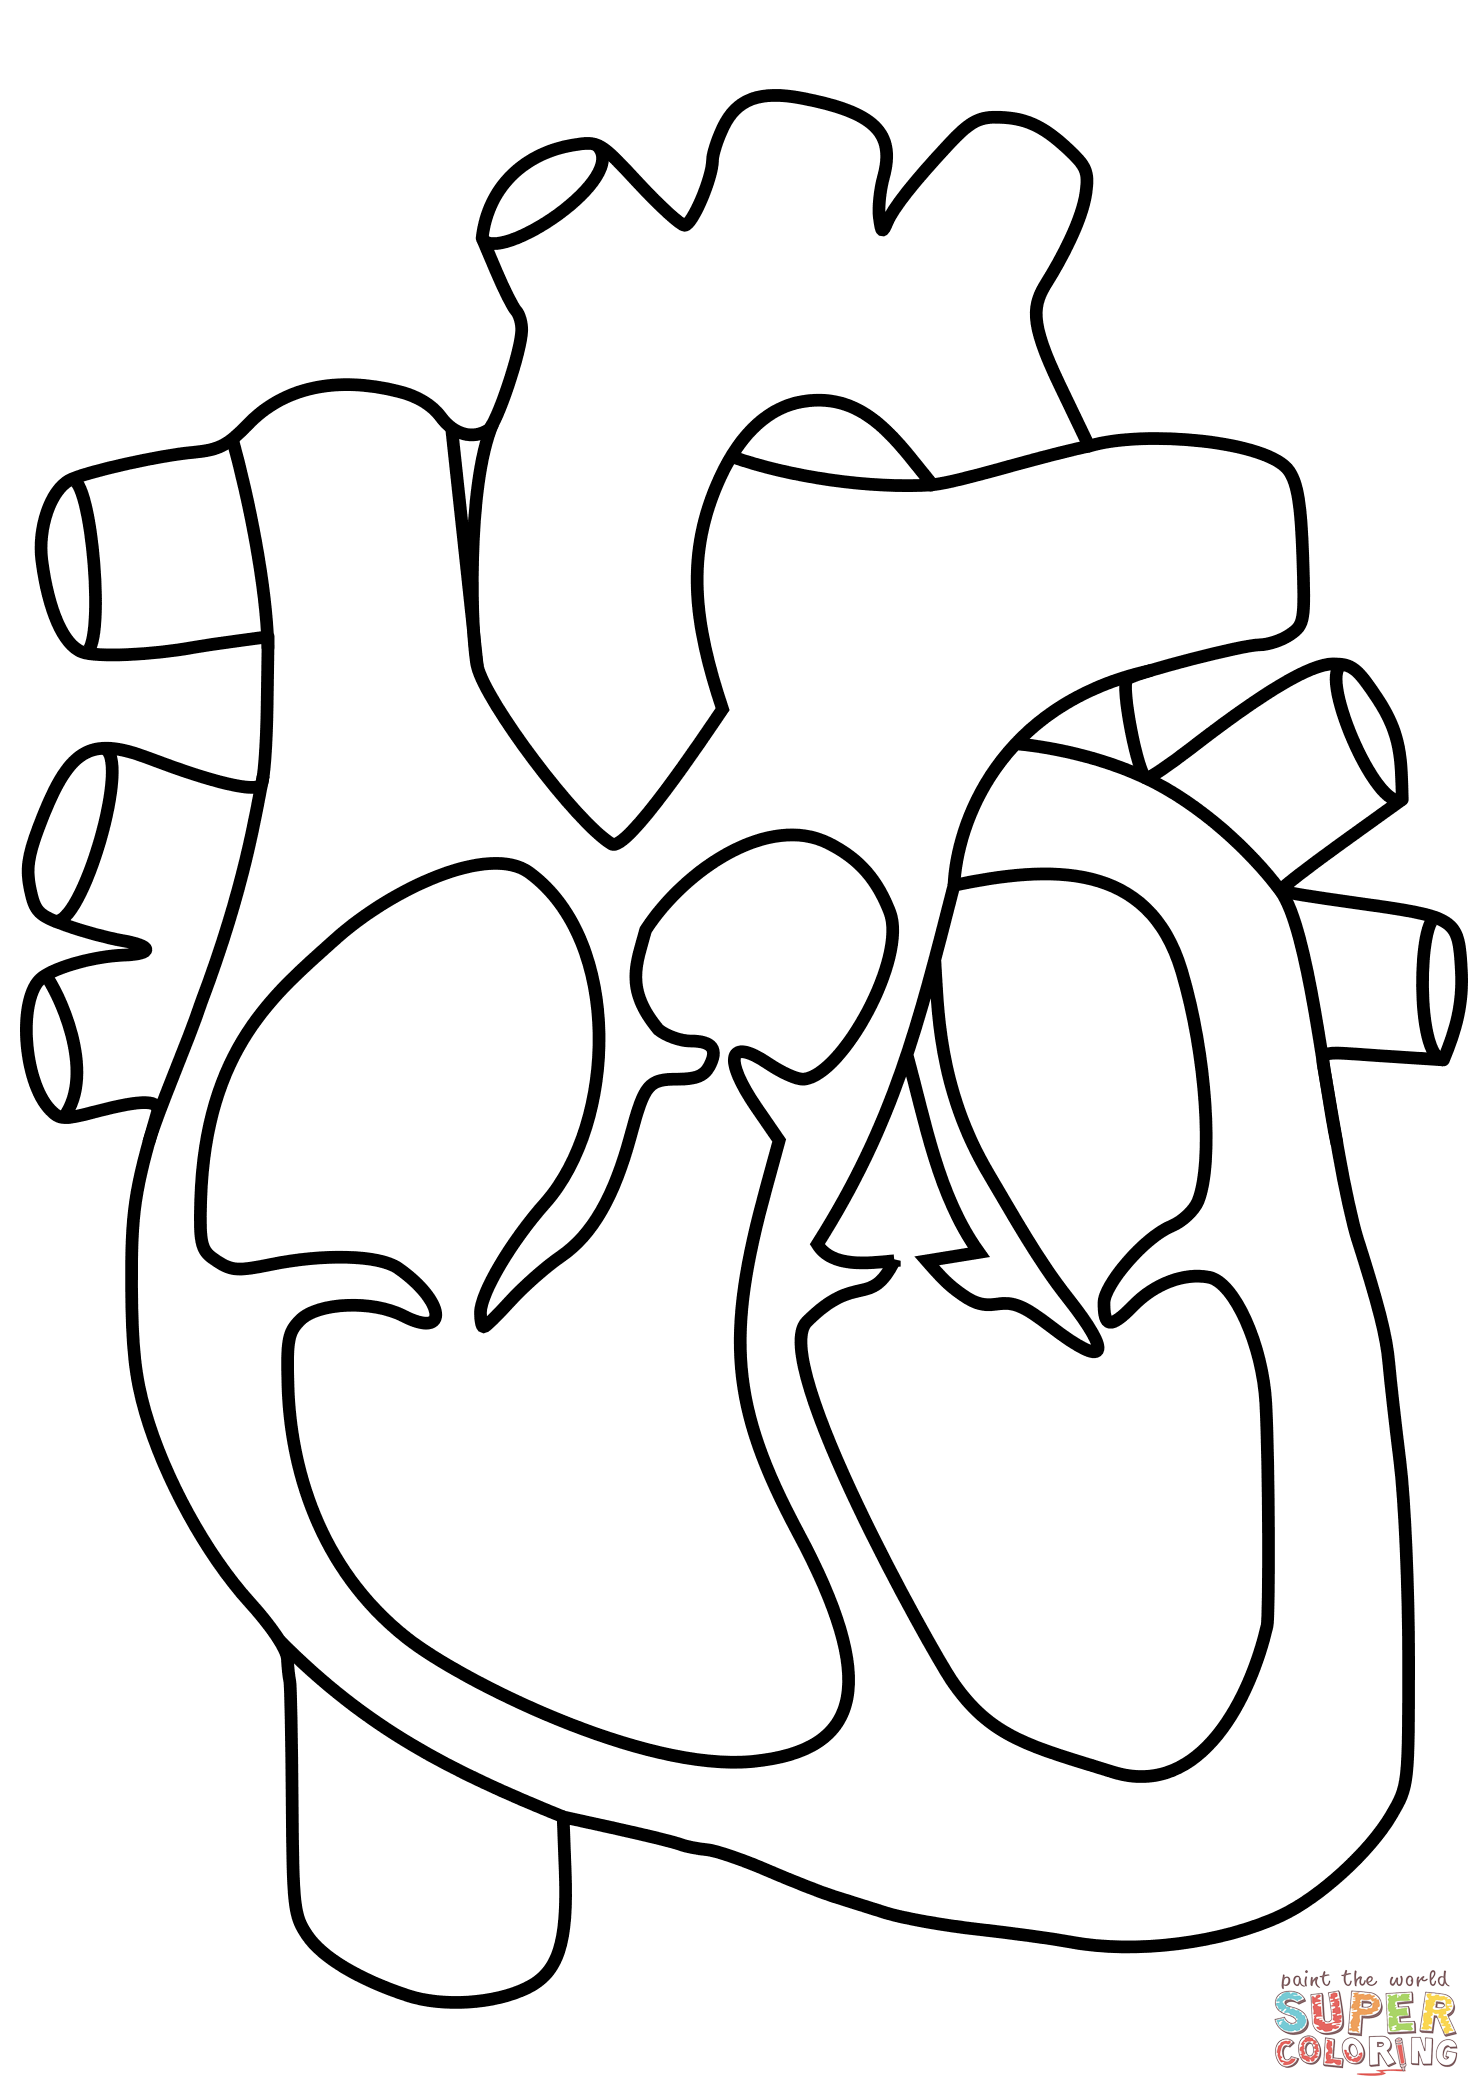 Human Heart coloring page | Free Printable Coloring Pages